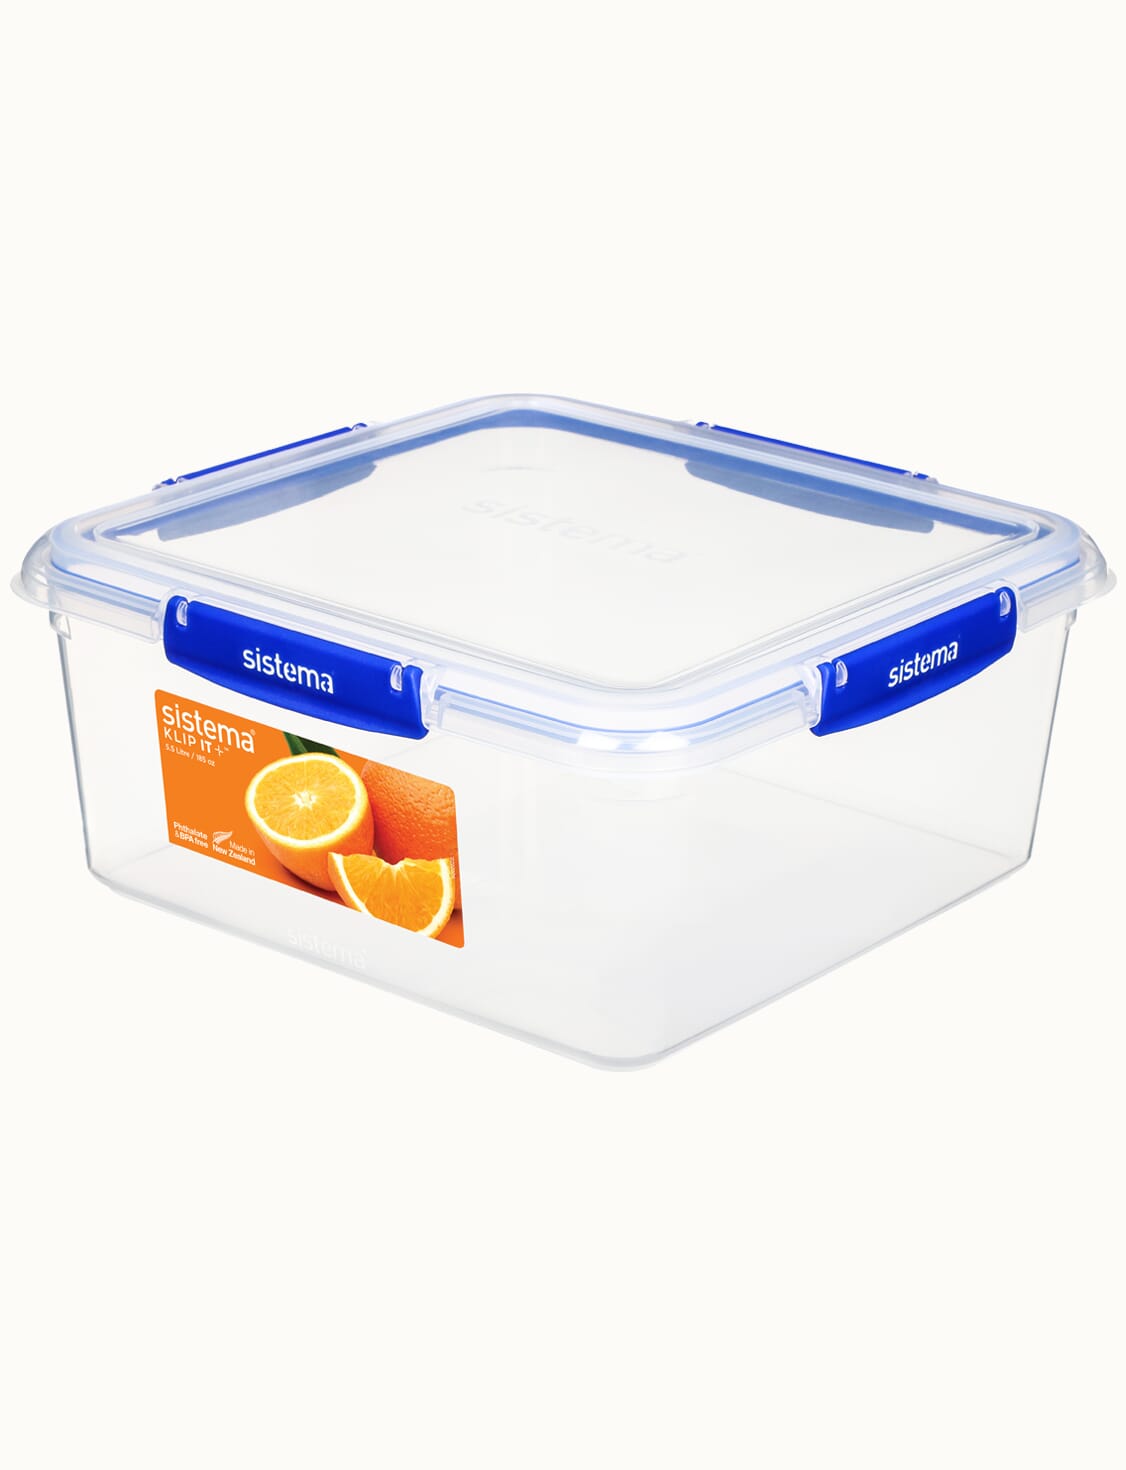 Why You Should Use Square or Rectangular Food Storage Containers